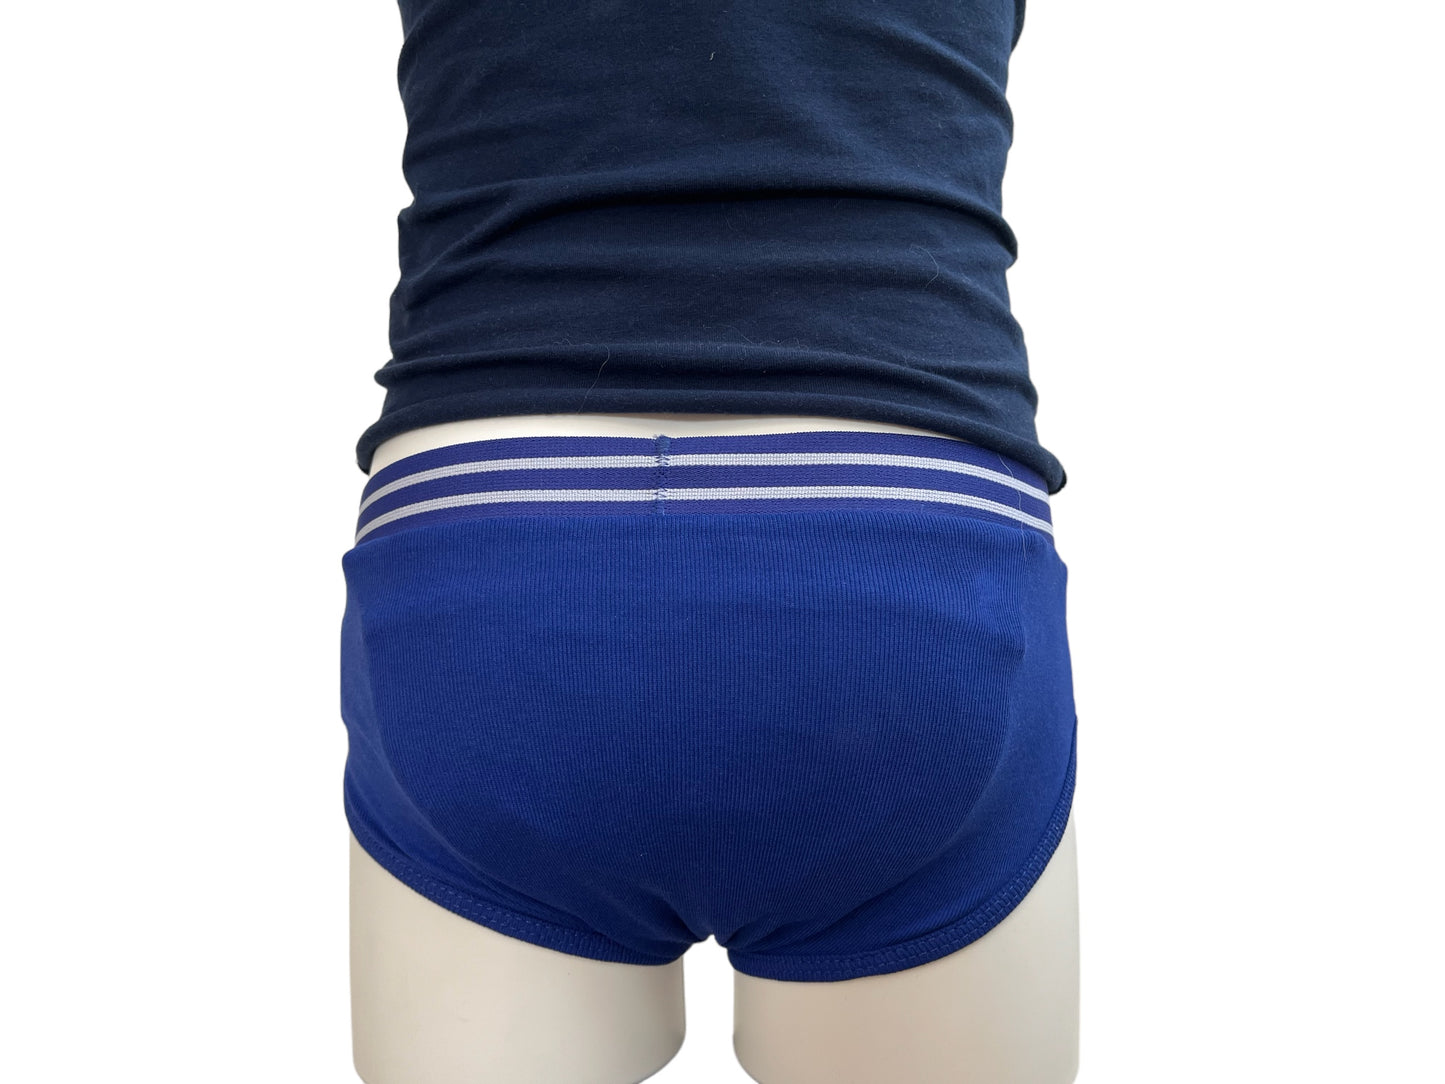 Back Pjama absorbent underwear for day time and night time bedwetting alarm